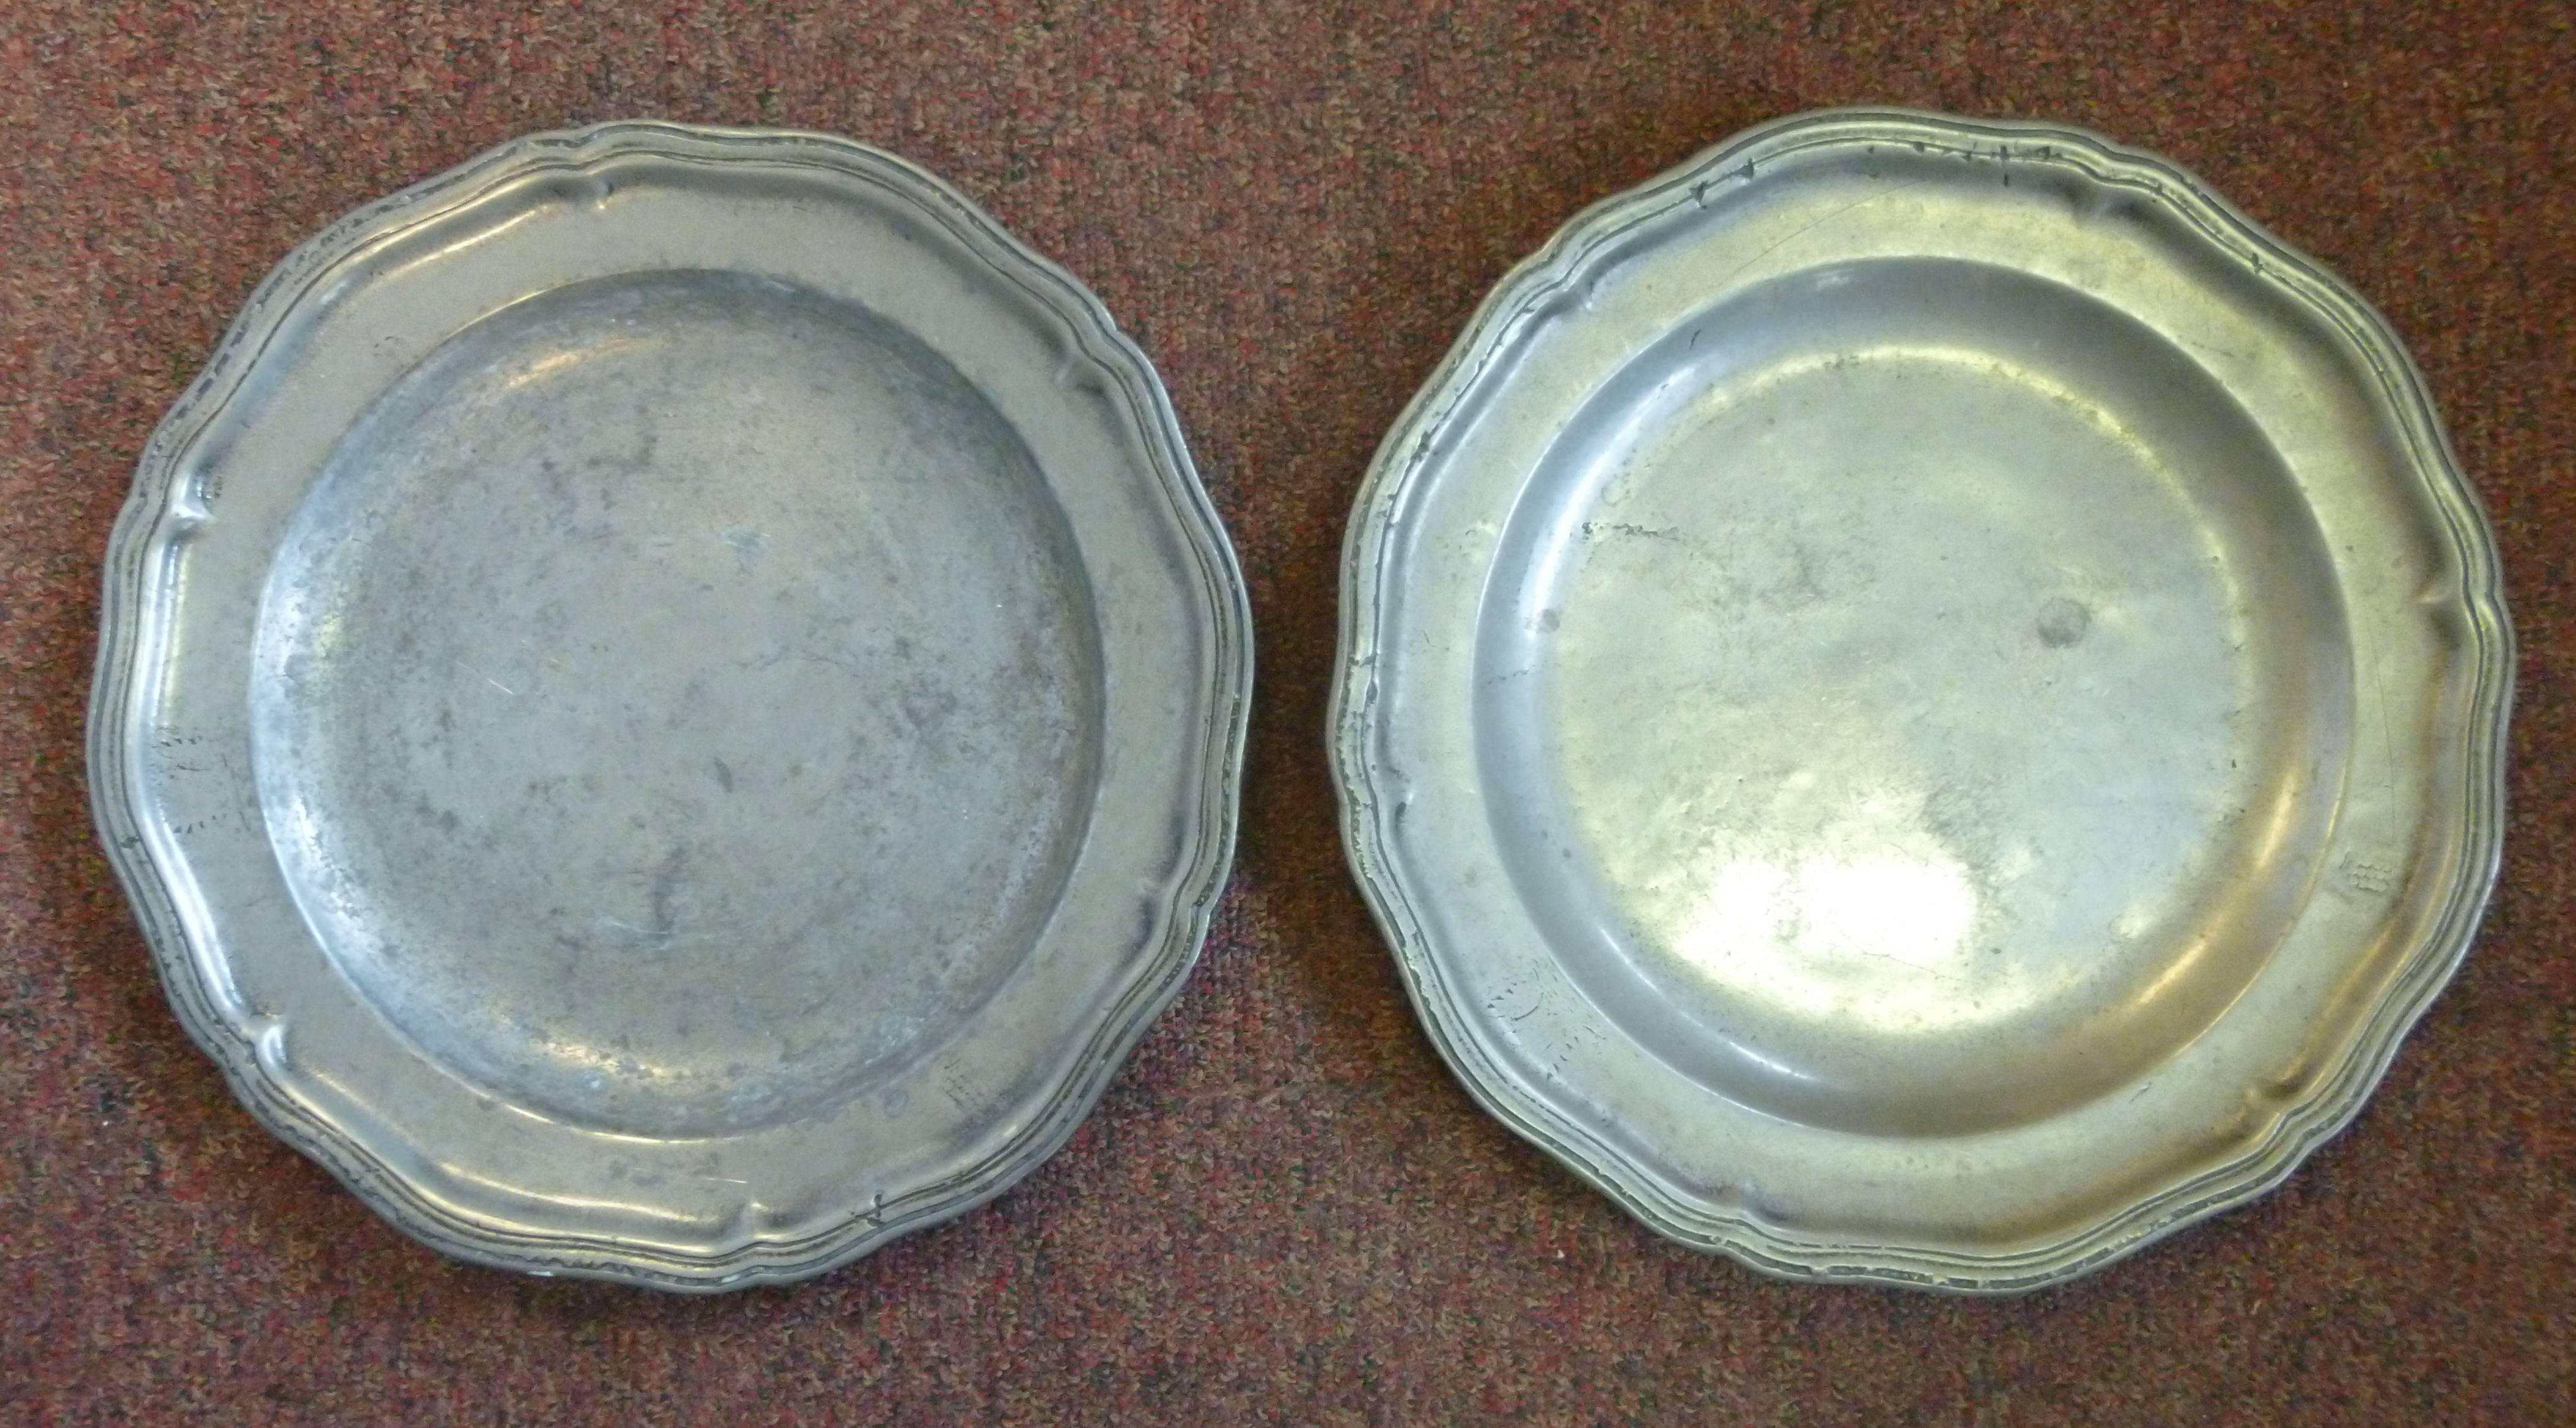 A pair of 18thC pewter plates with wavy borders 11.